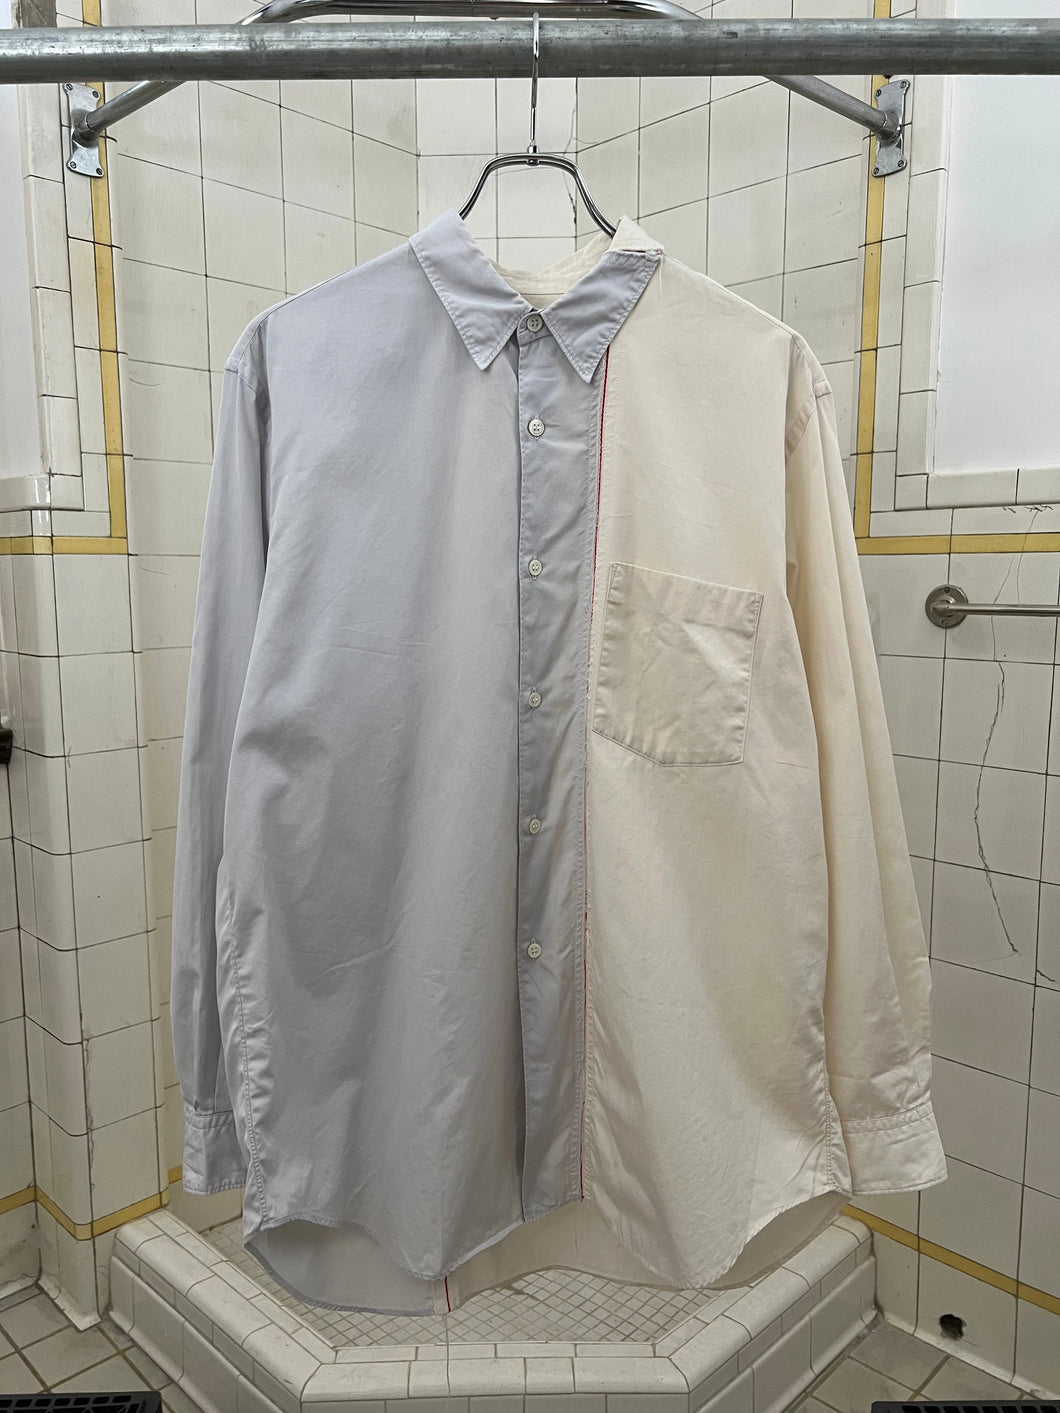 2000s CDGH Reconstructed Two Part Poplin Shirt - Size M